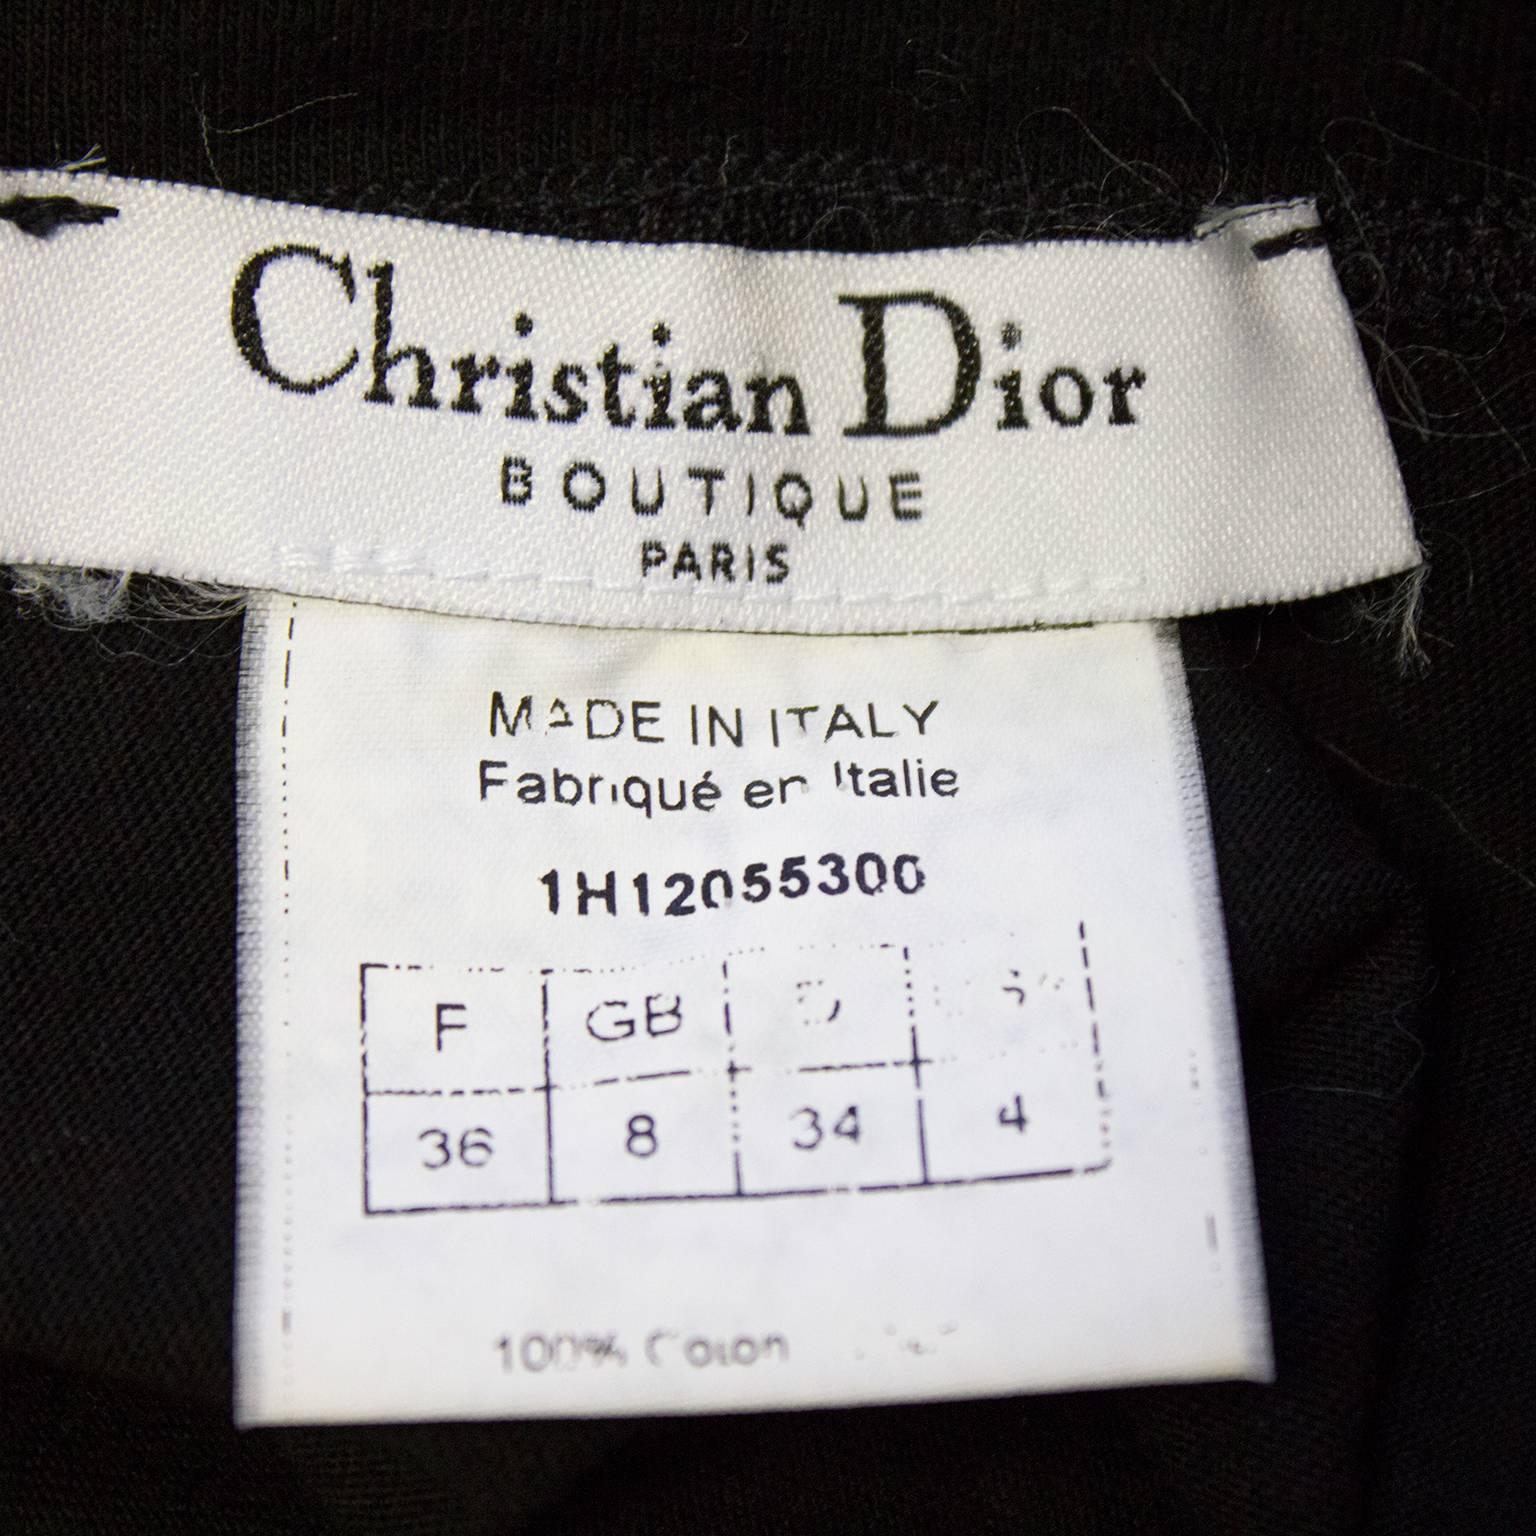 1990's Iconic Christian Dior 'J'ADORE DIOR' Muscle T at 1stDibs | j ...